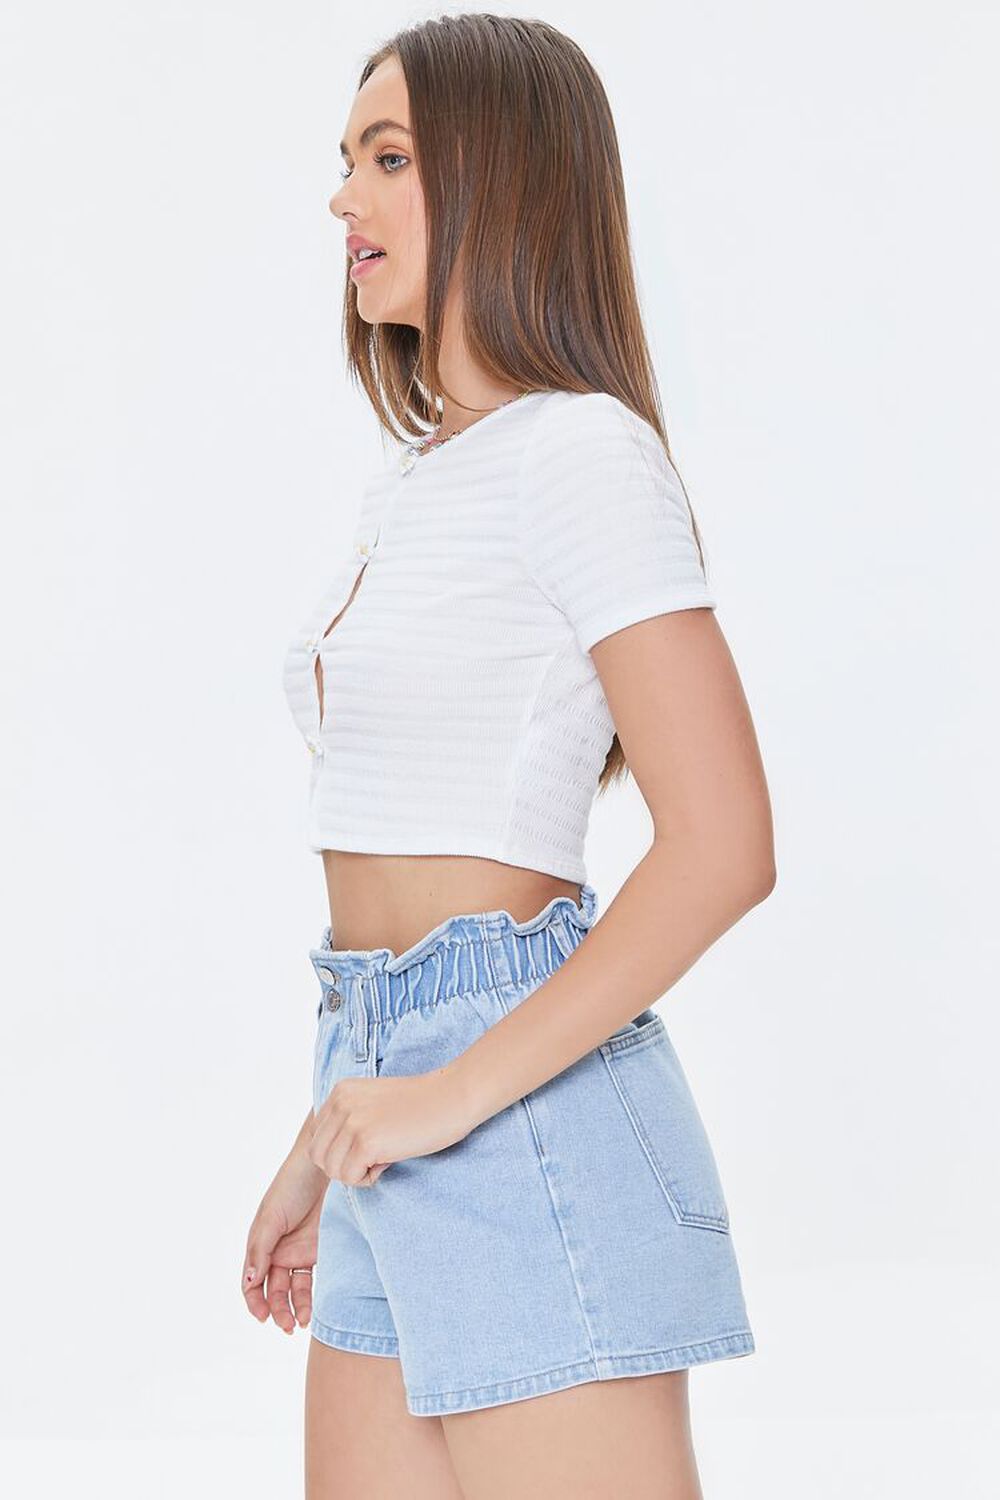 WHITE Ribbed Daisy Button-Up Crop Top, image 2